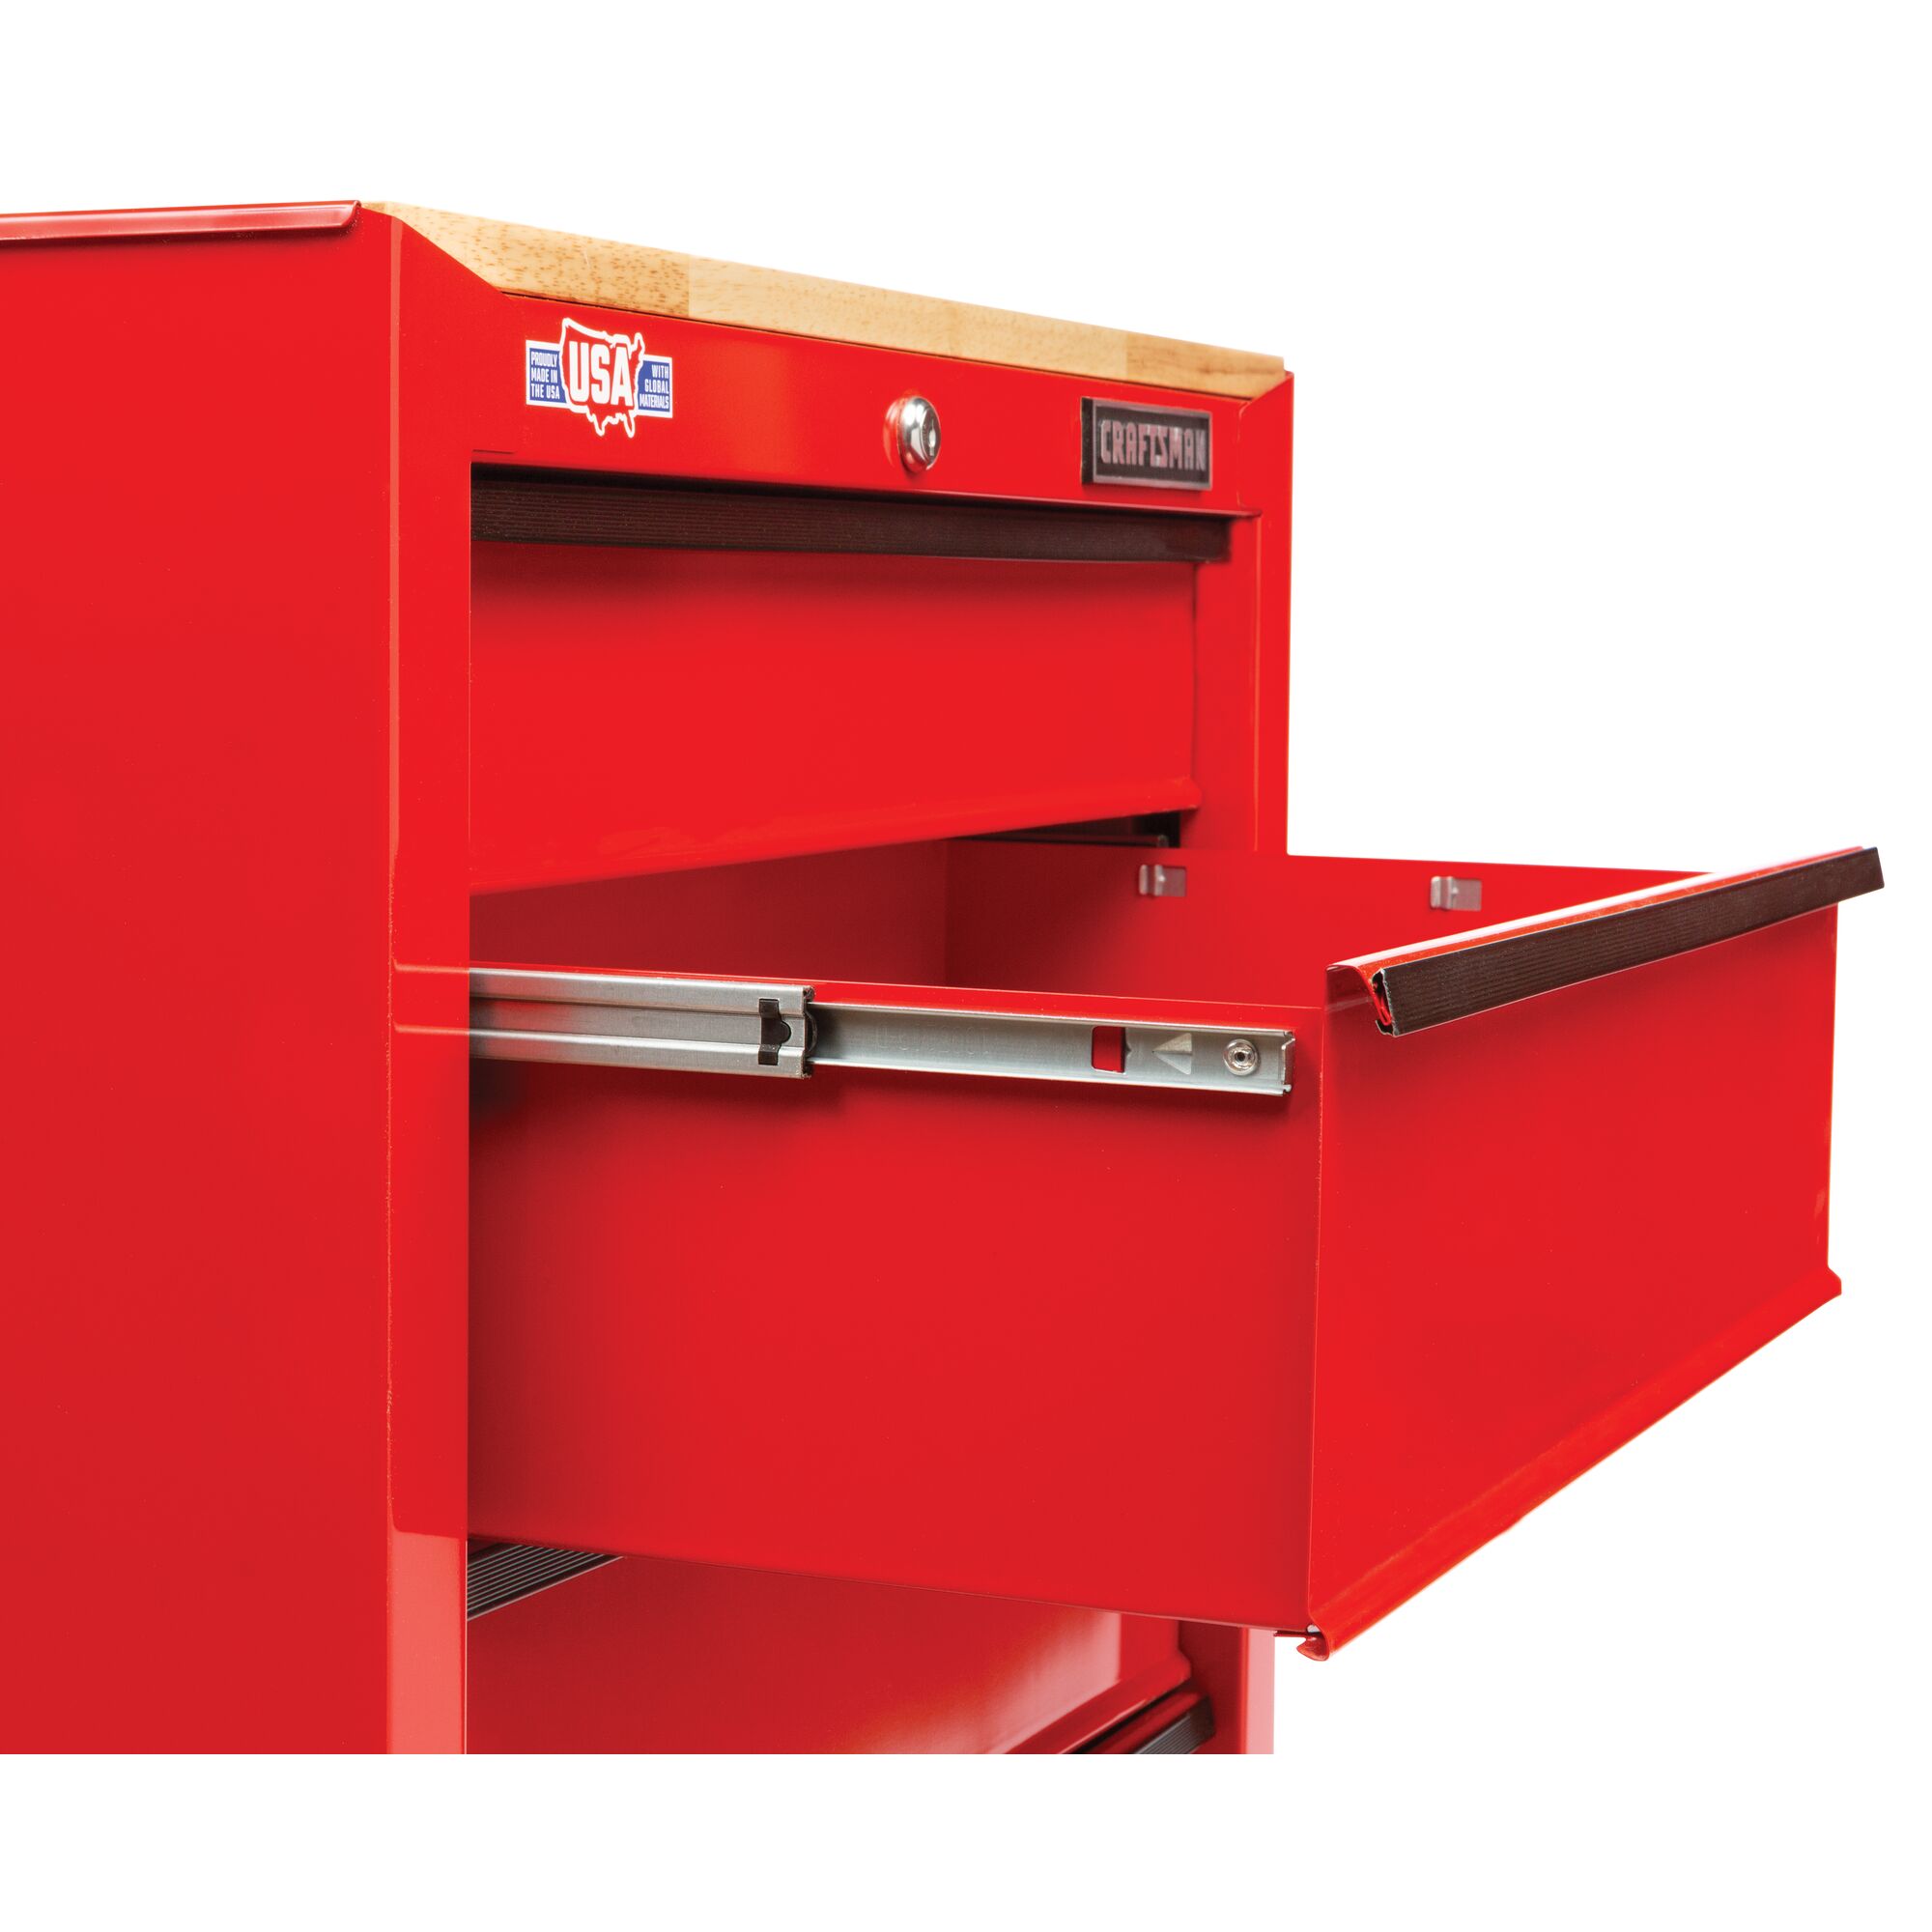 Red CRAFTSMAN 26 inch wide 4 drawer mobile workstation at 3/4 turn with second drawer from the top opened